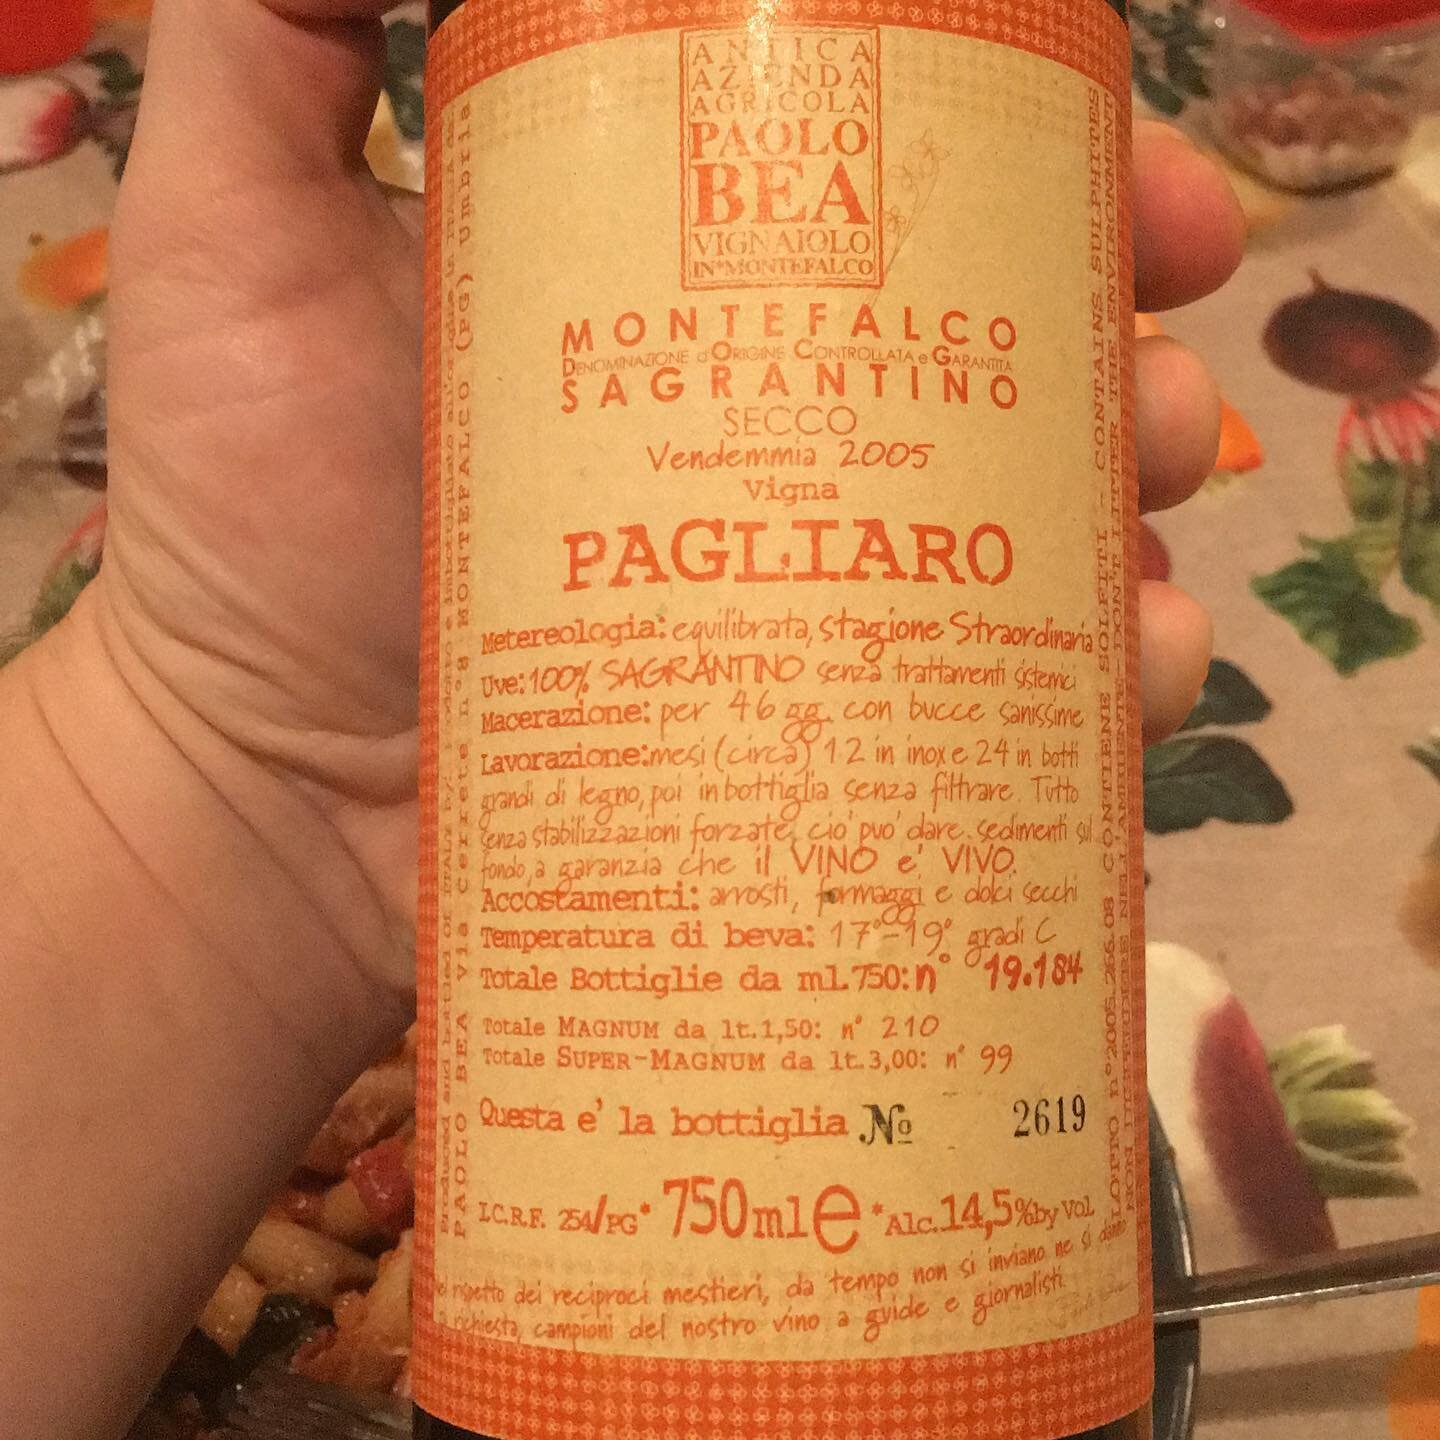 2005 Paolo Bea Sagrantino di Montefalco Pagliaro

Thought I&rsquo;d no longer love this stuff after a decade+ but if anything this was the best Bea I&rsquo;ve ever had.  I&rsquo;ve loved these wines for their unpolished but well-earned confidence.  I